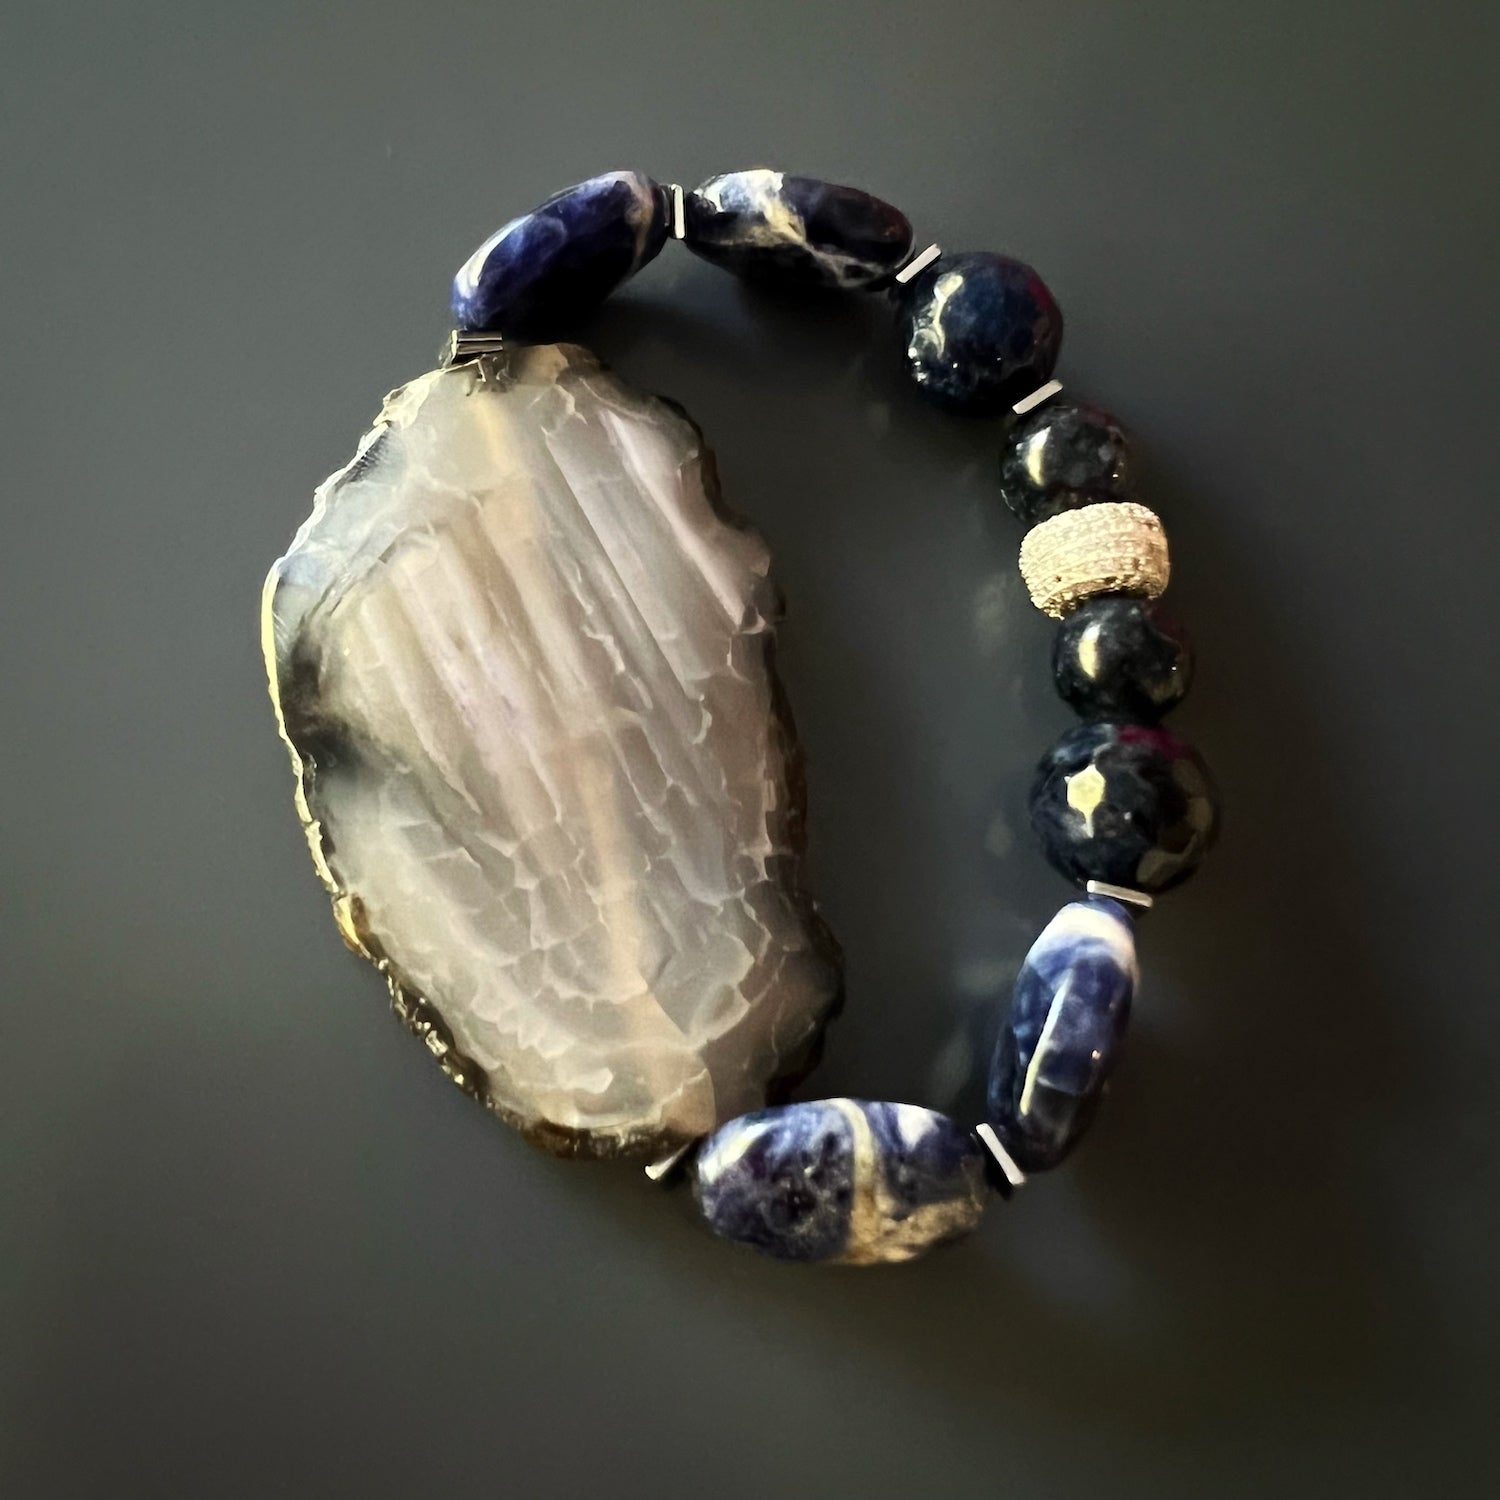 Agate Spiritual Balance Bracelet with natural raw agate stones, flat blue and white sodalite stones, and sparkling Swarovski crystals, designed to promote emotional harmony and balance in daily life.